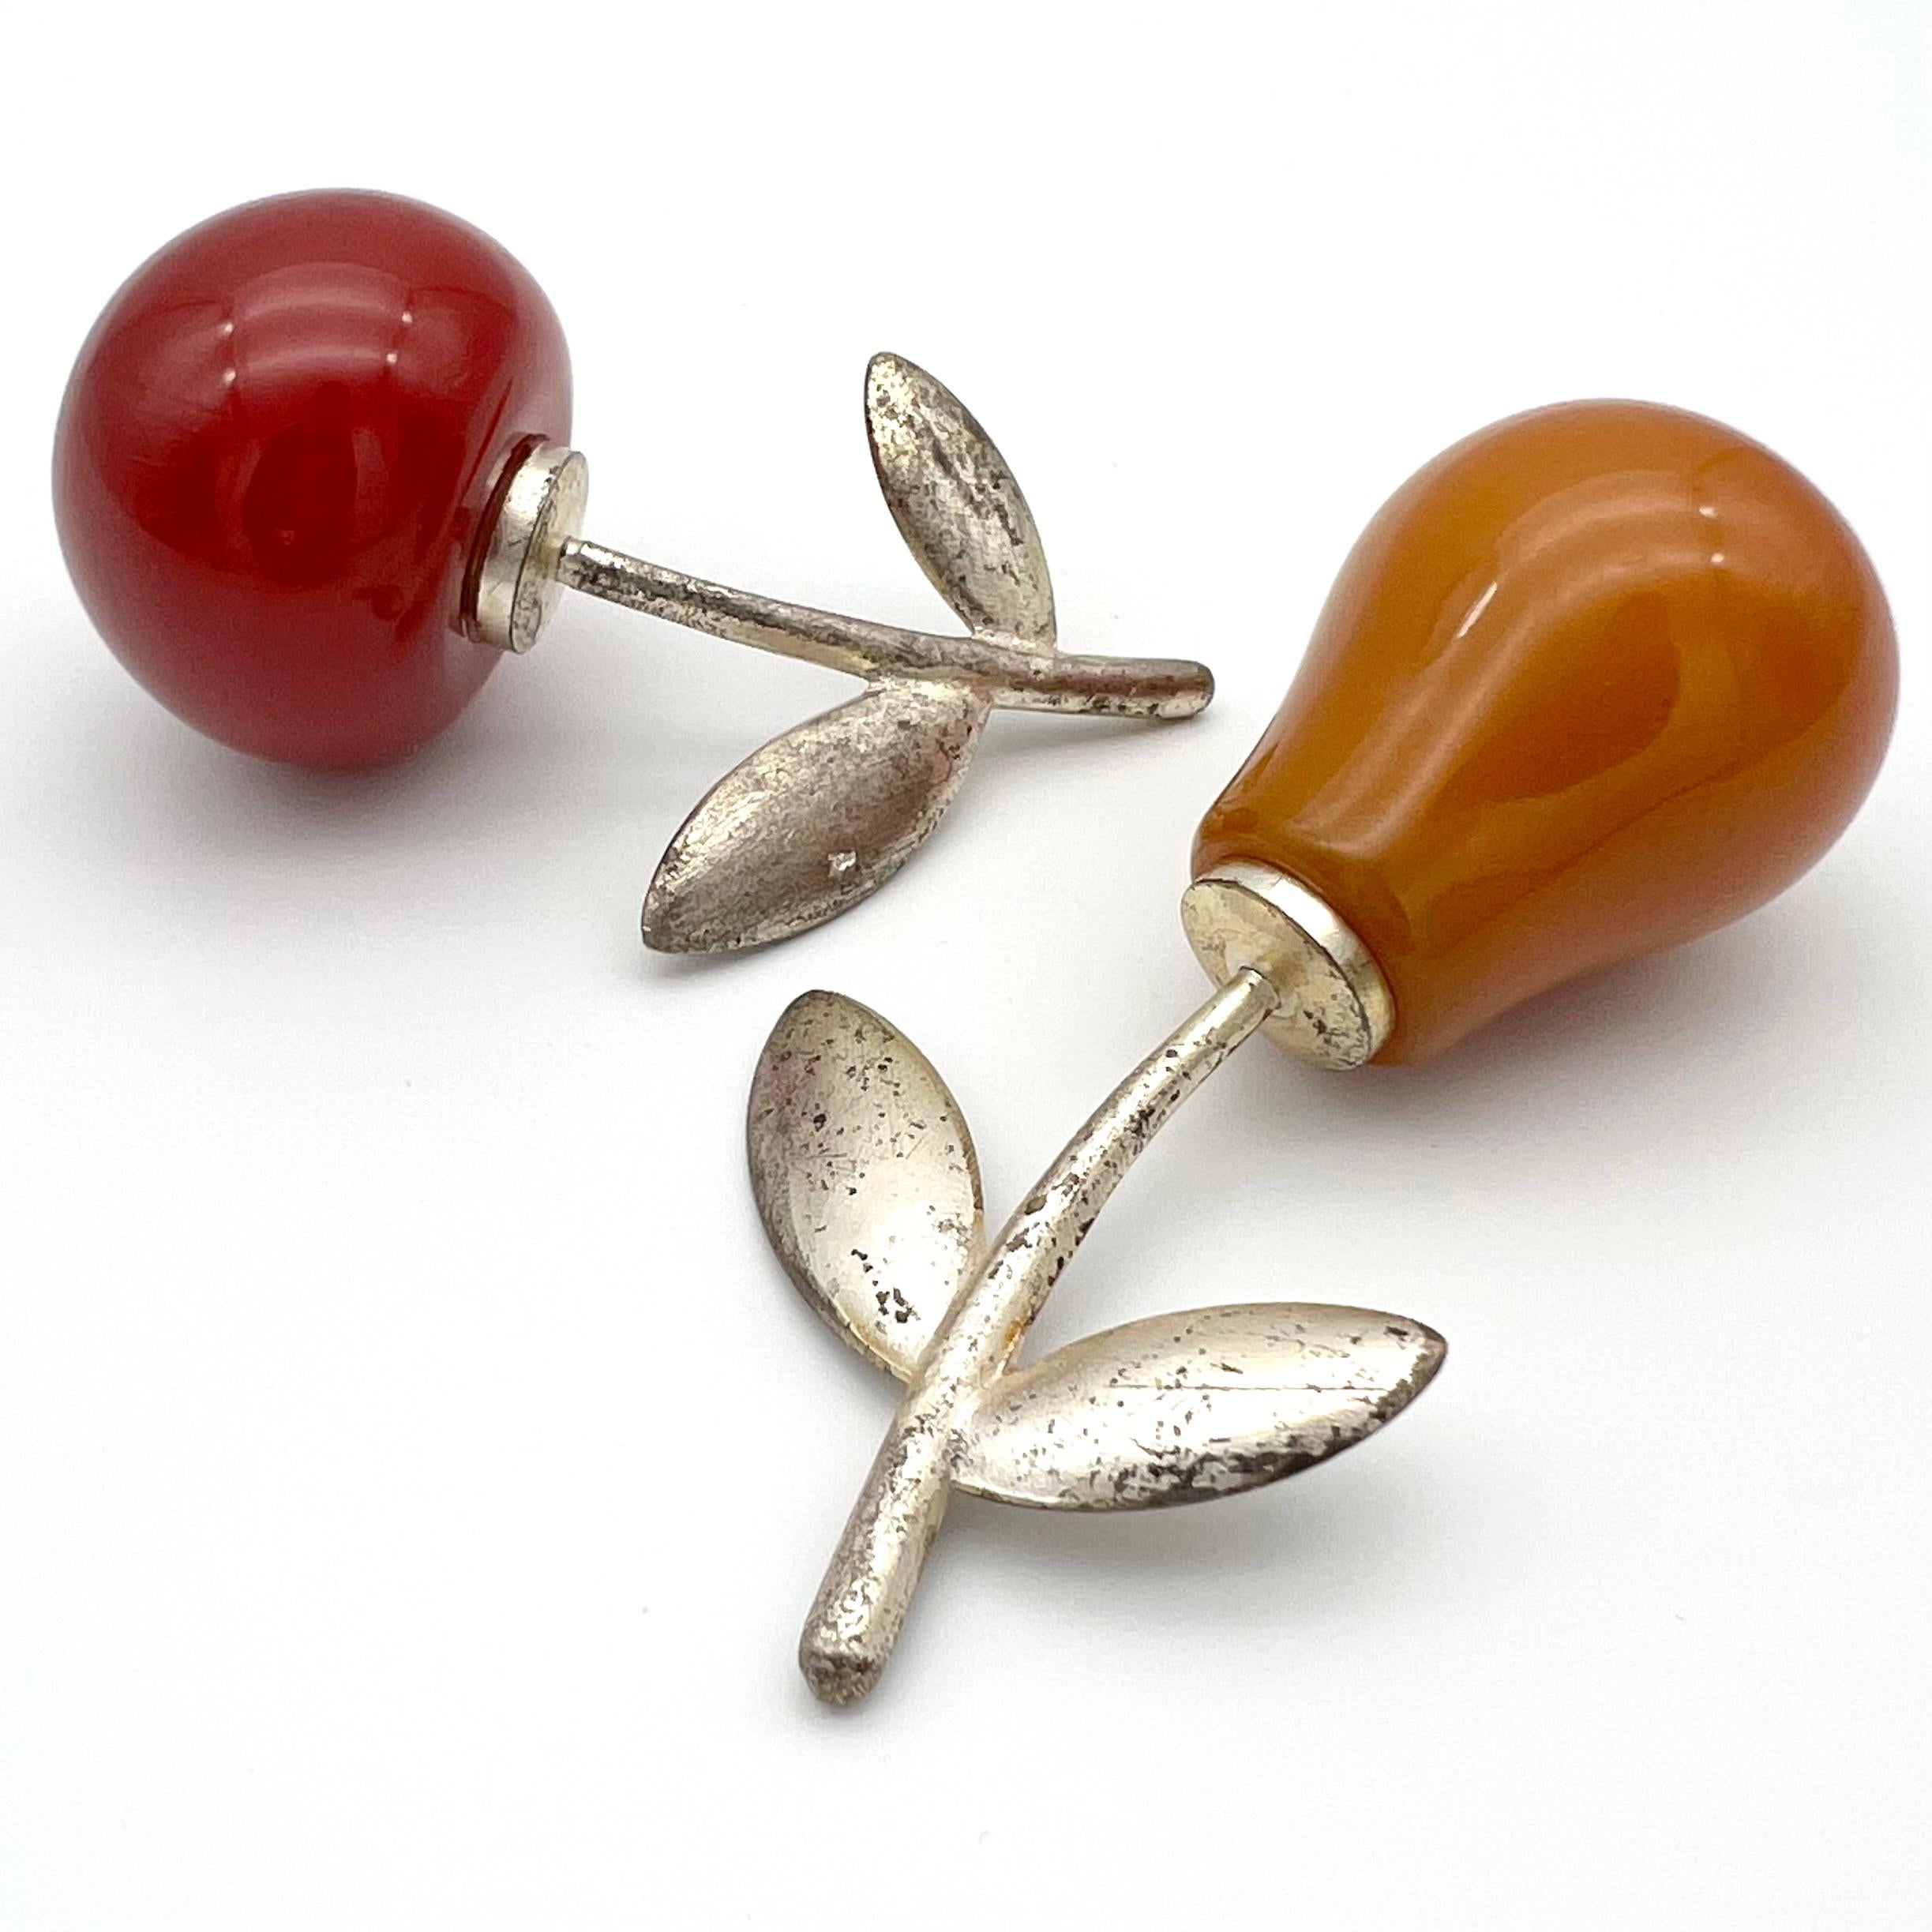 Art-Deco Salt and pepper shaker set. Prewar production - very early 30s.
The body of the shakers (apple and pear) is made of coloured Bakelite, the stems are of silver plated brass.
To open them, you can screw the stems off and on. 

Apple: